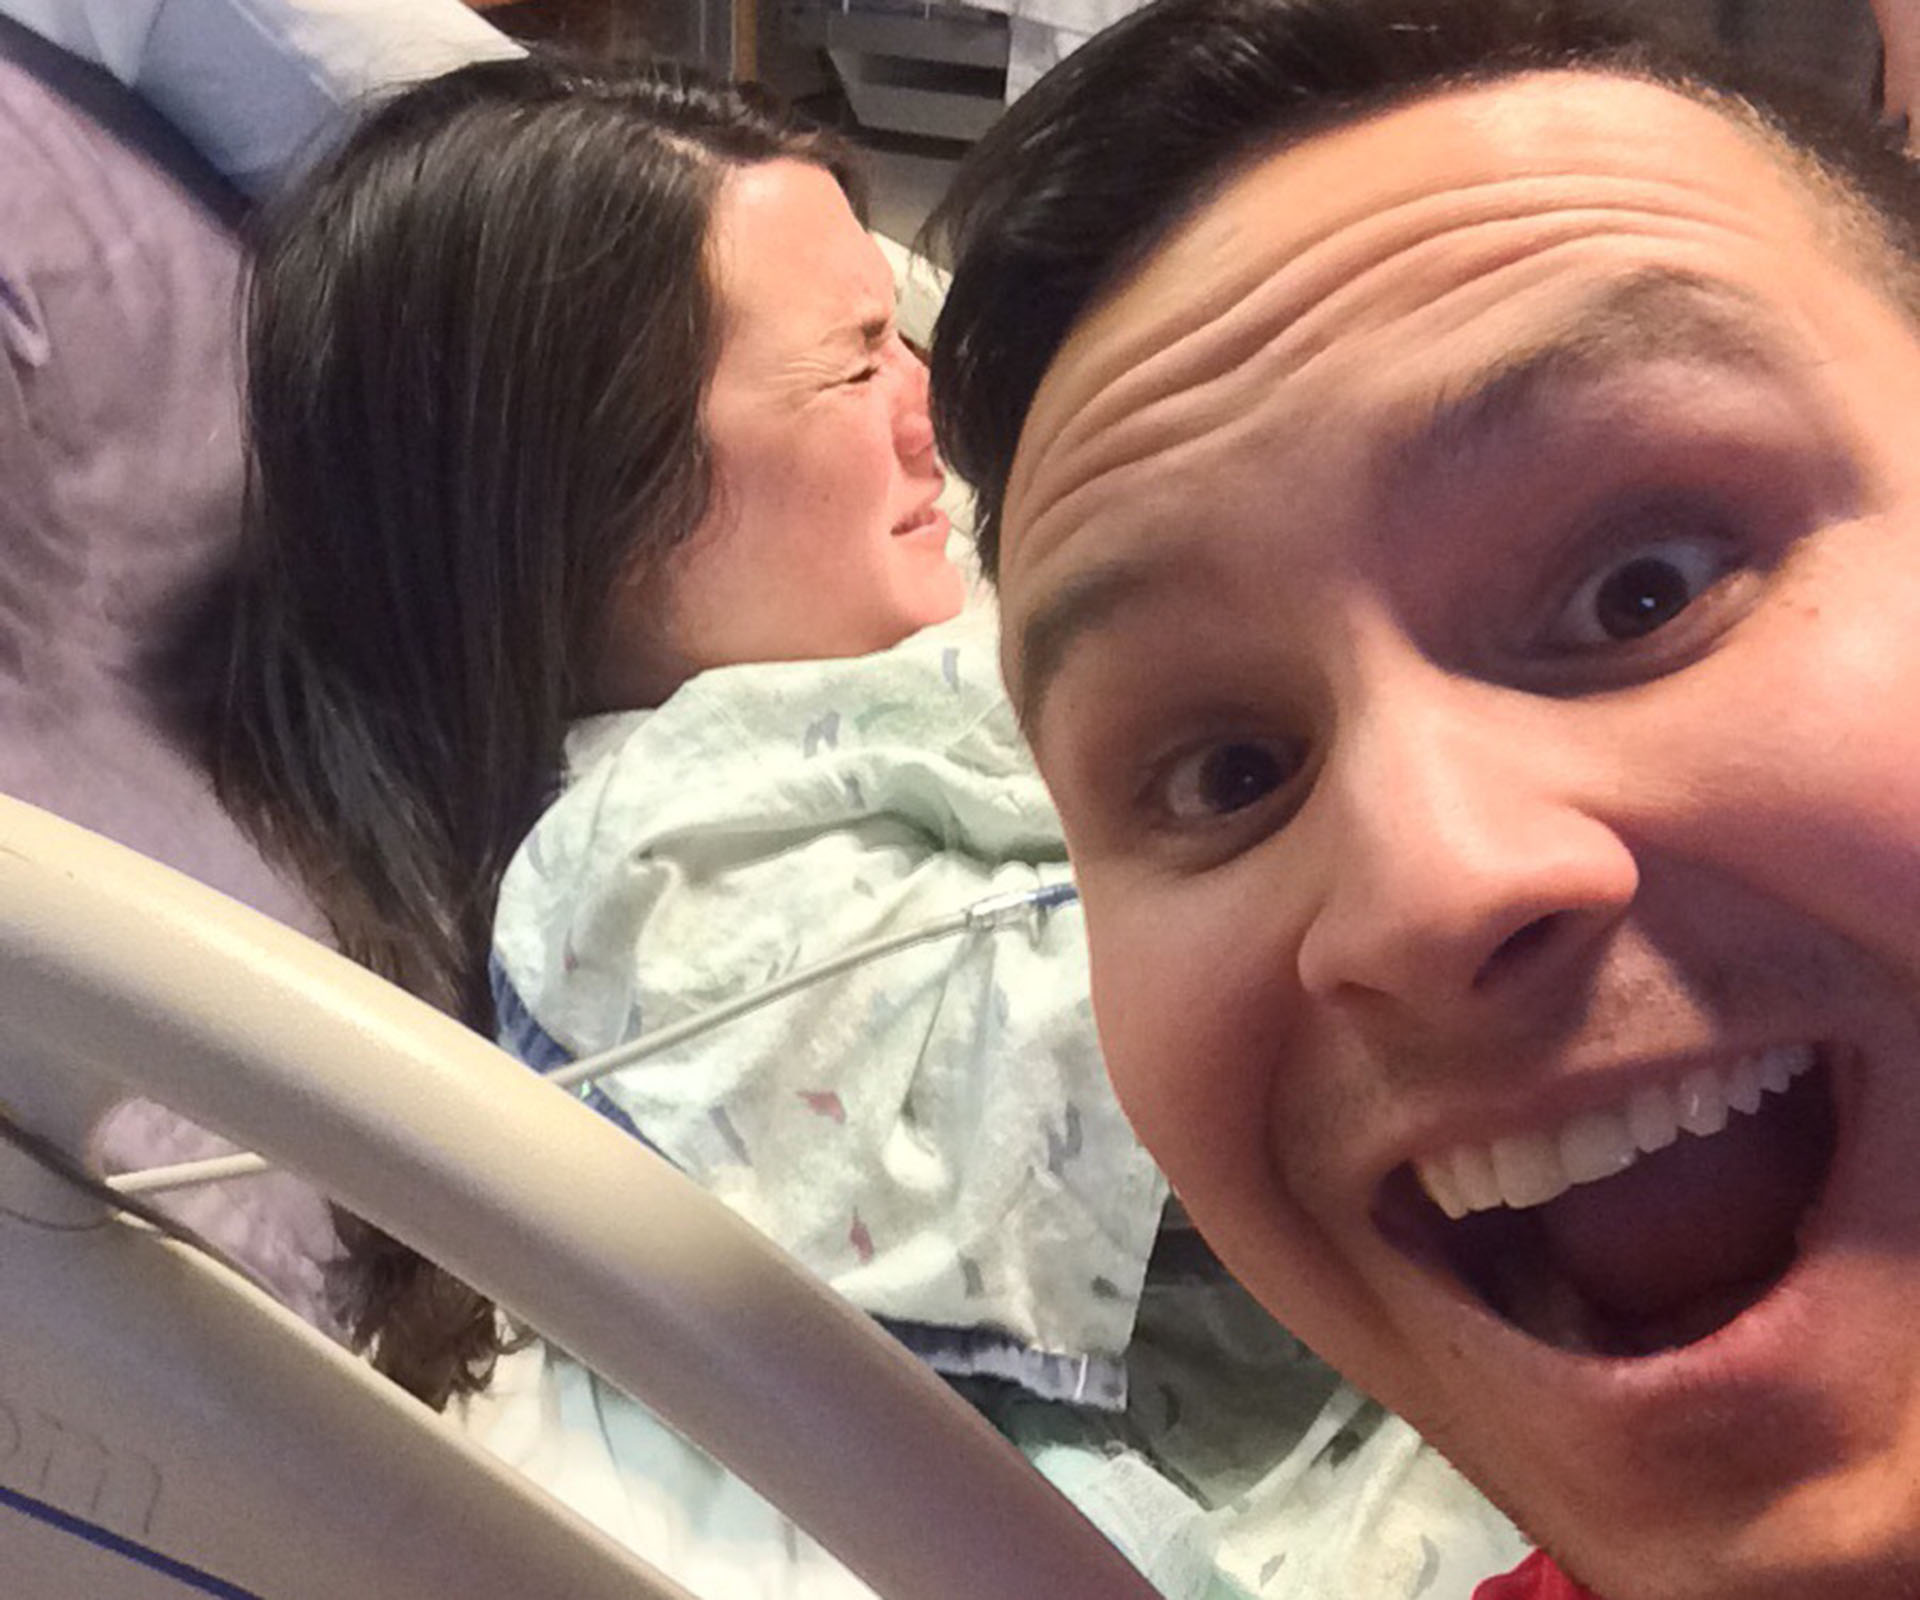 Meet the dad who snapped a selfie while his wife gave birth